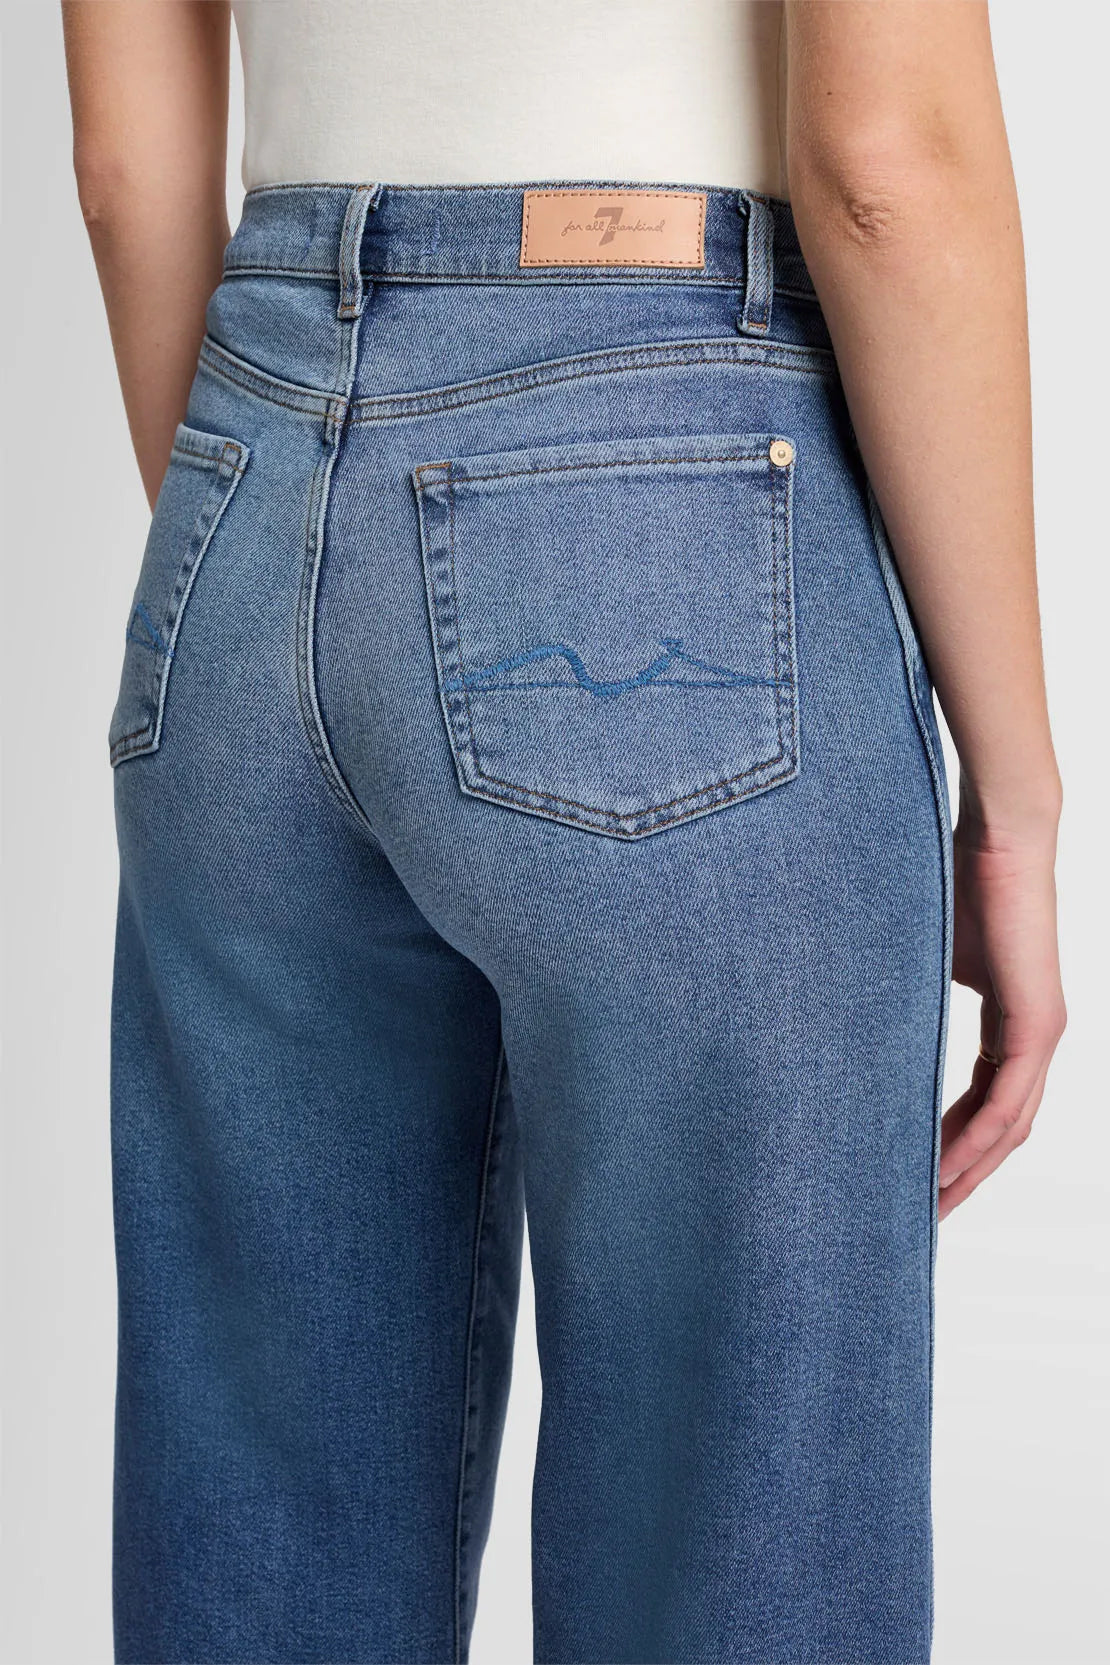 Jeans Lotta Vintage Affair in Mid Blue7 For All Mankind - Anita Hass